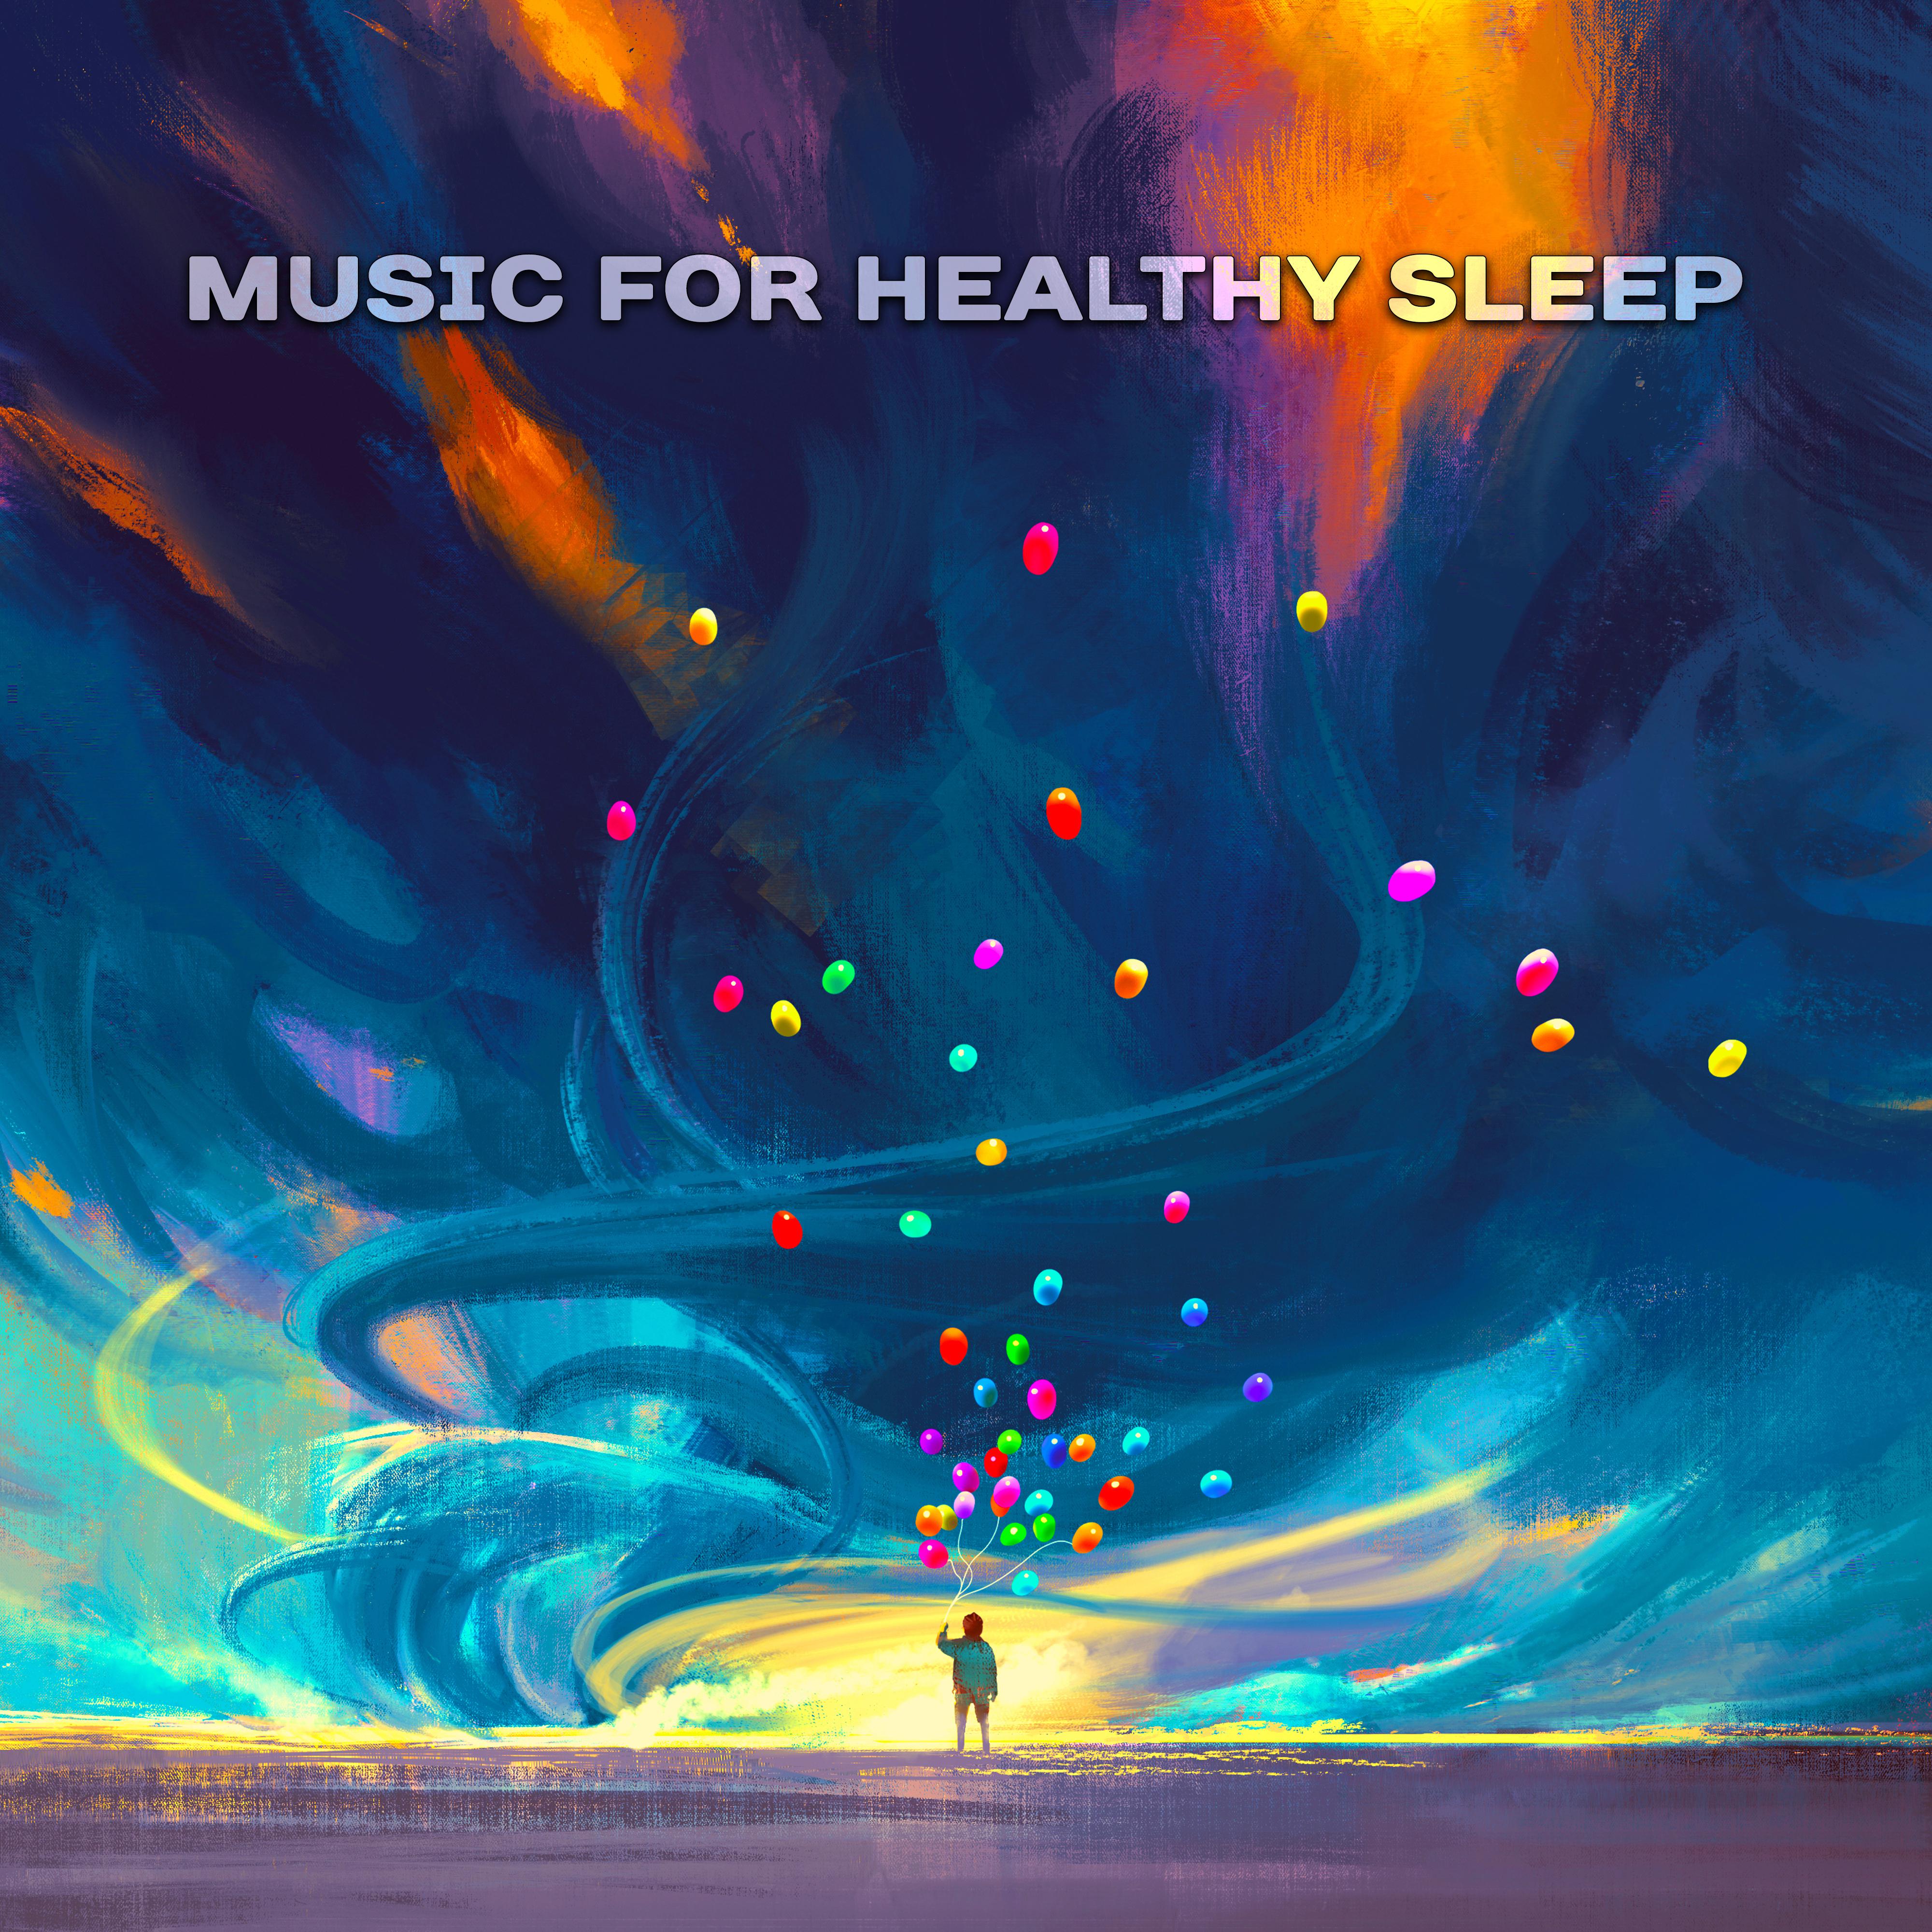 Music for Healthy Sleep – Cure Insomnia with Therapy Music, Relaxing Nature Sounds, Relief Stress And Sleep Better